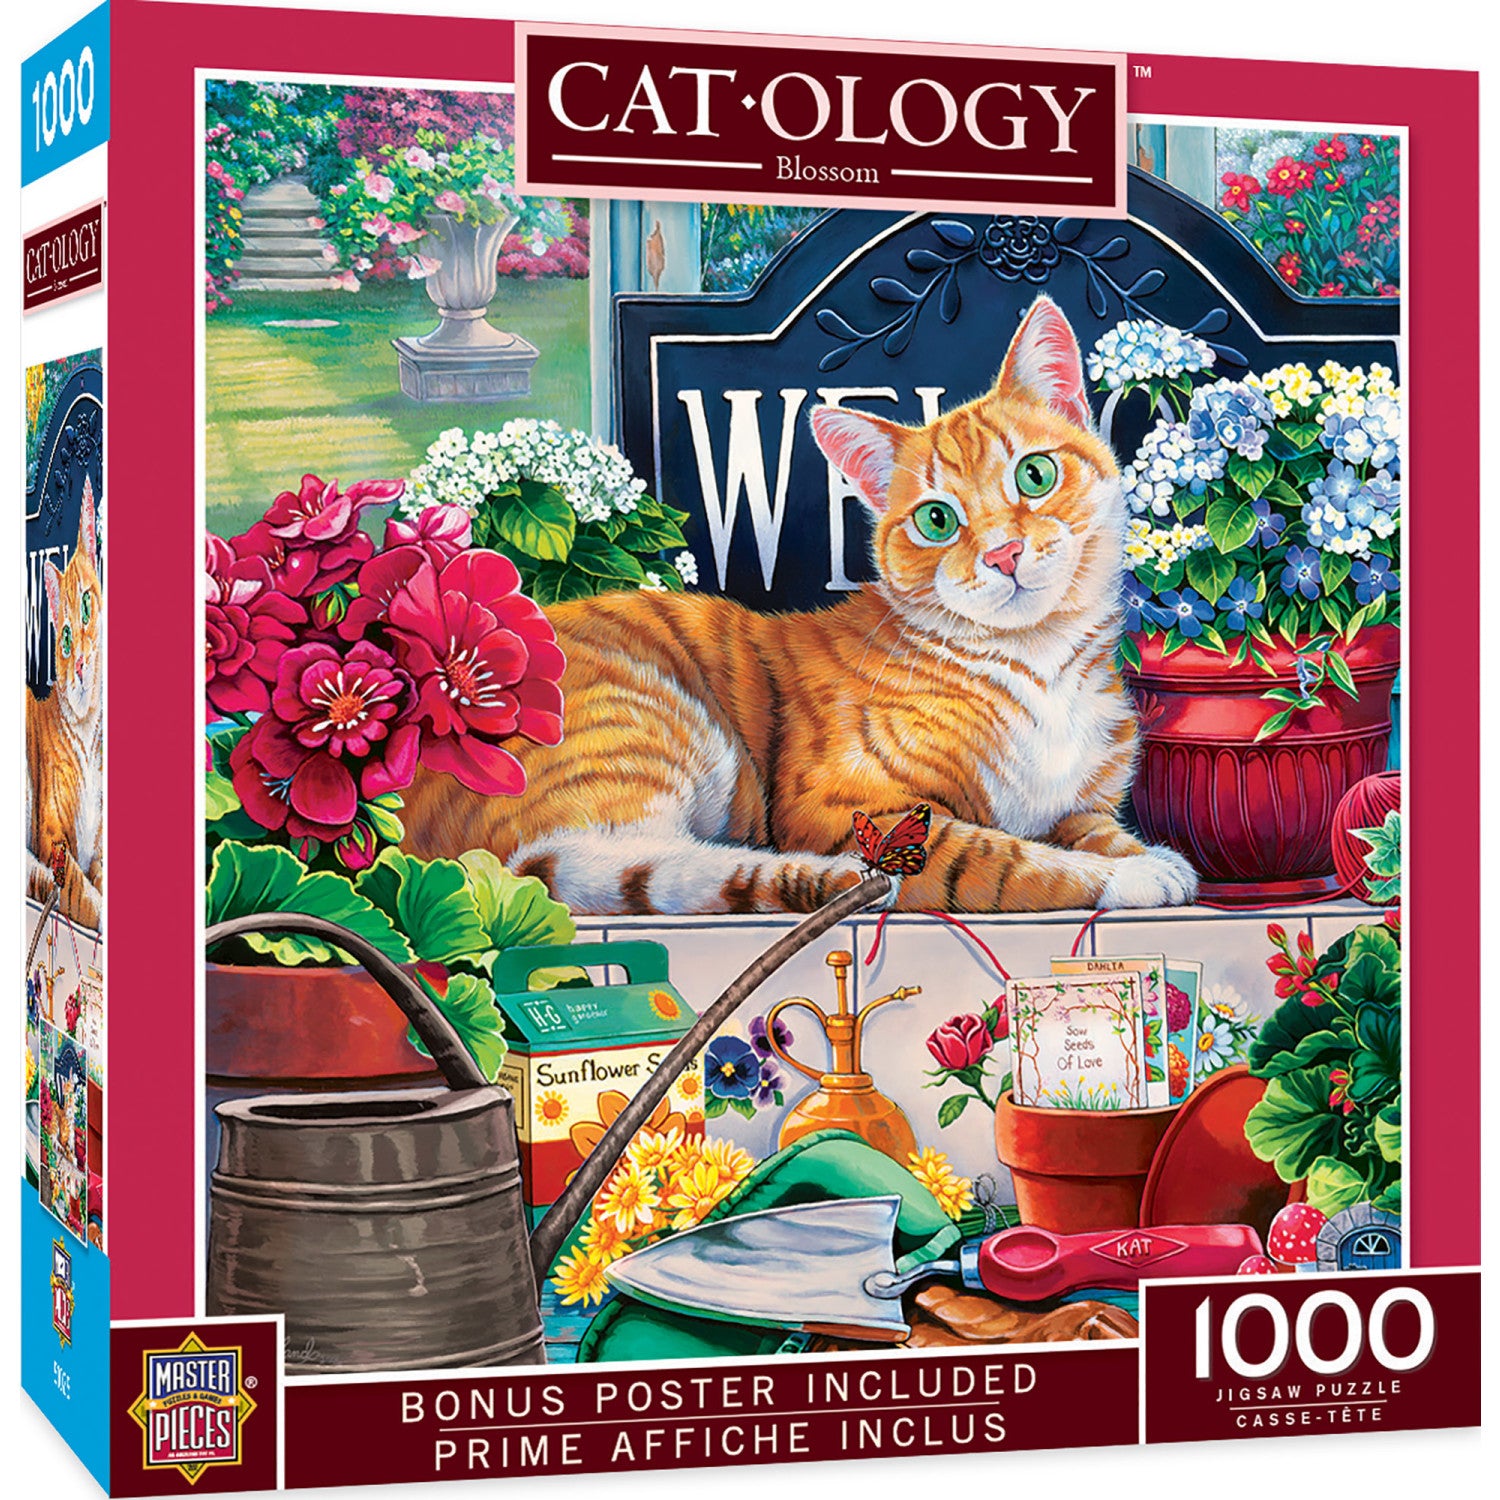 Catology - Blossom 1000 Piece Puzzle